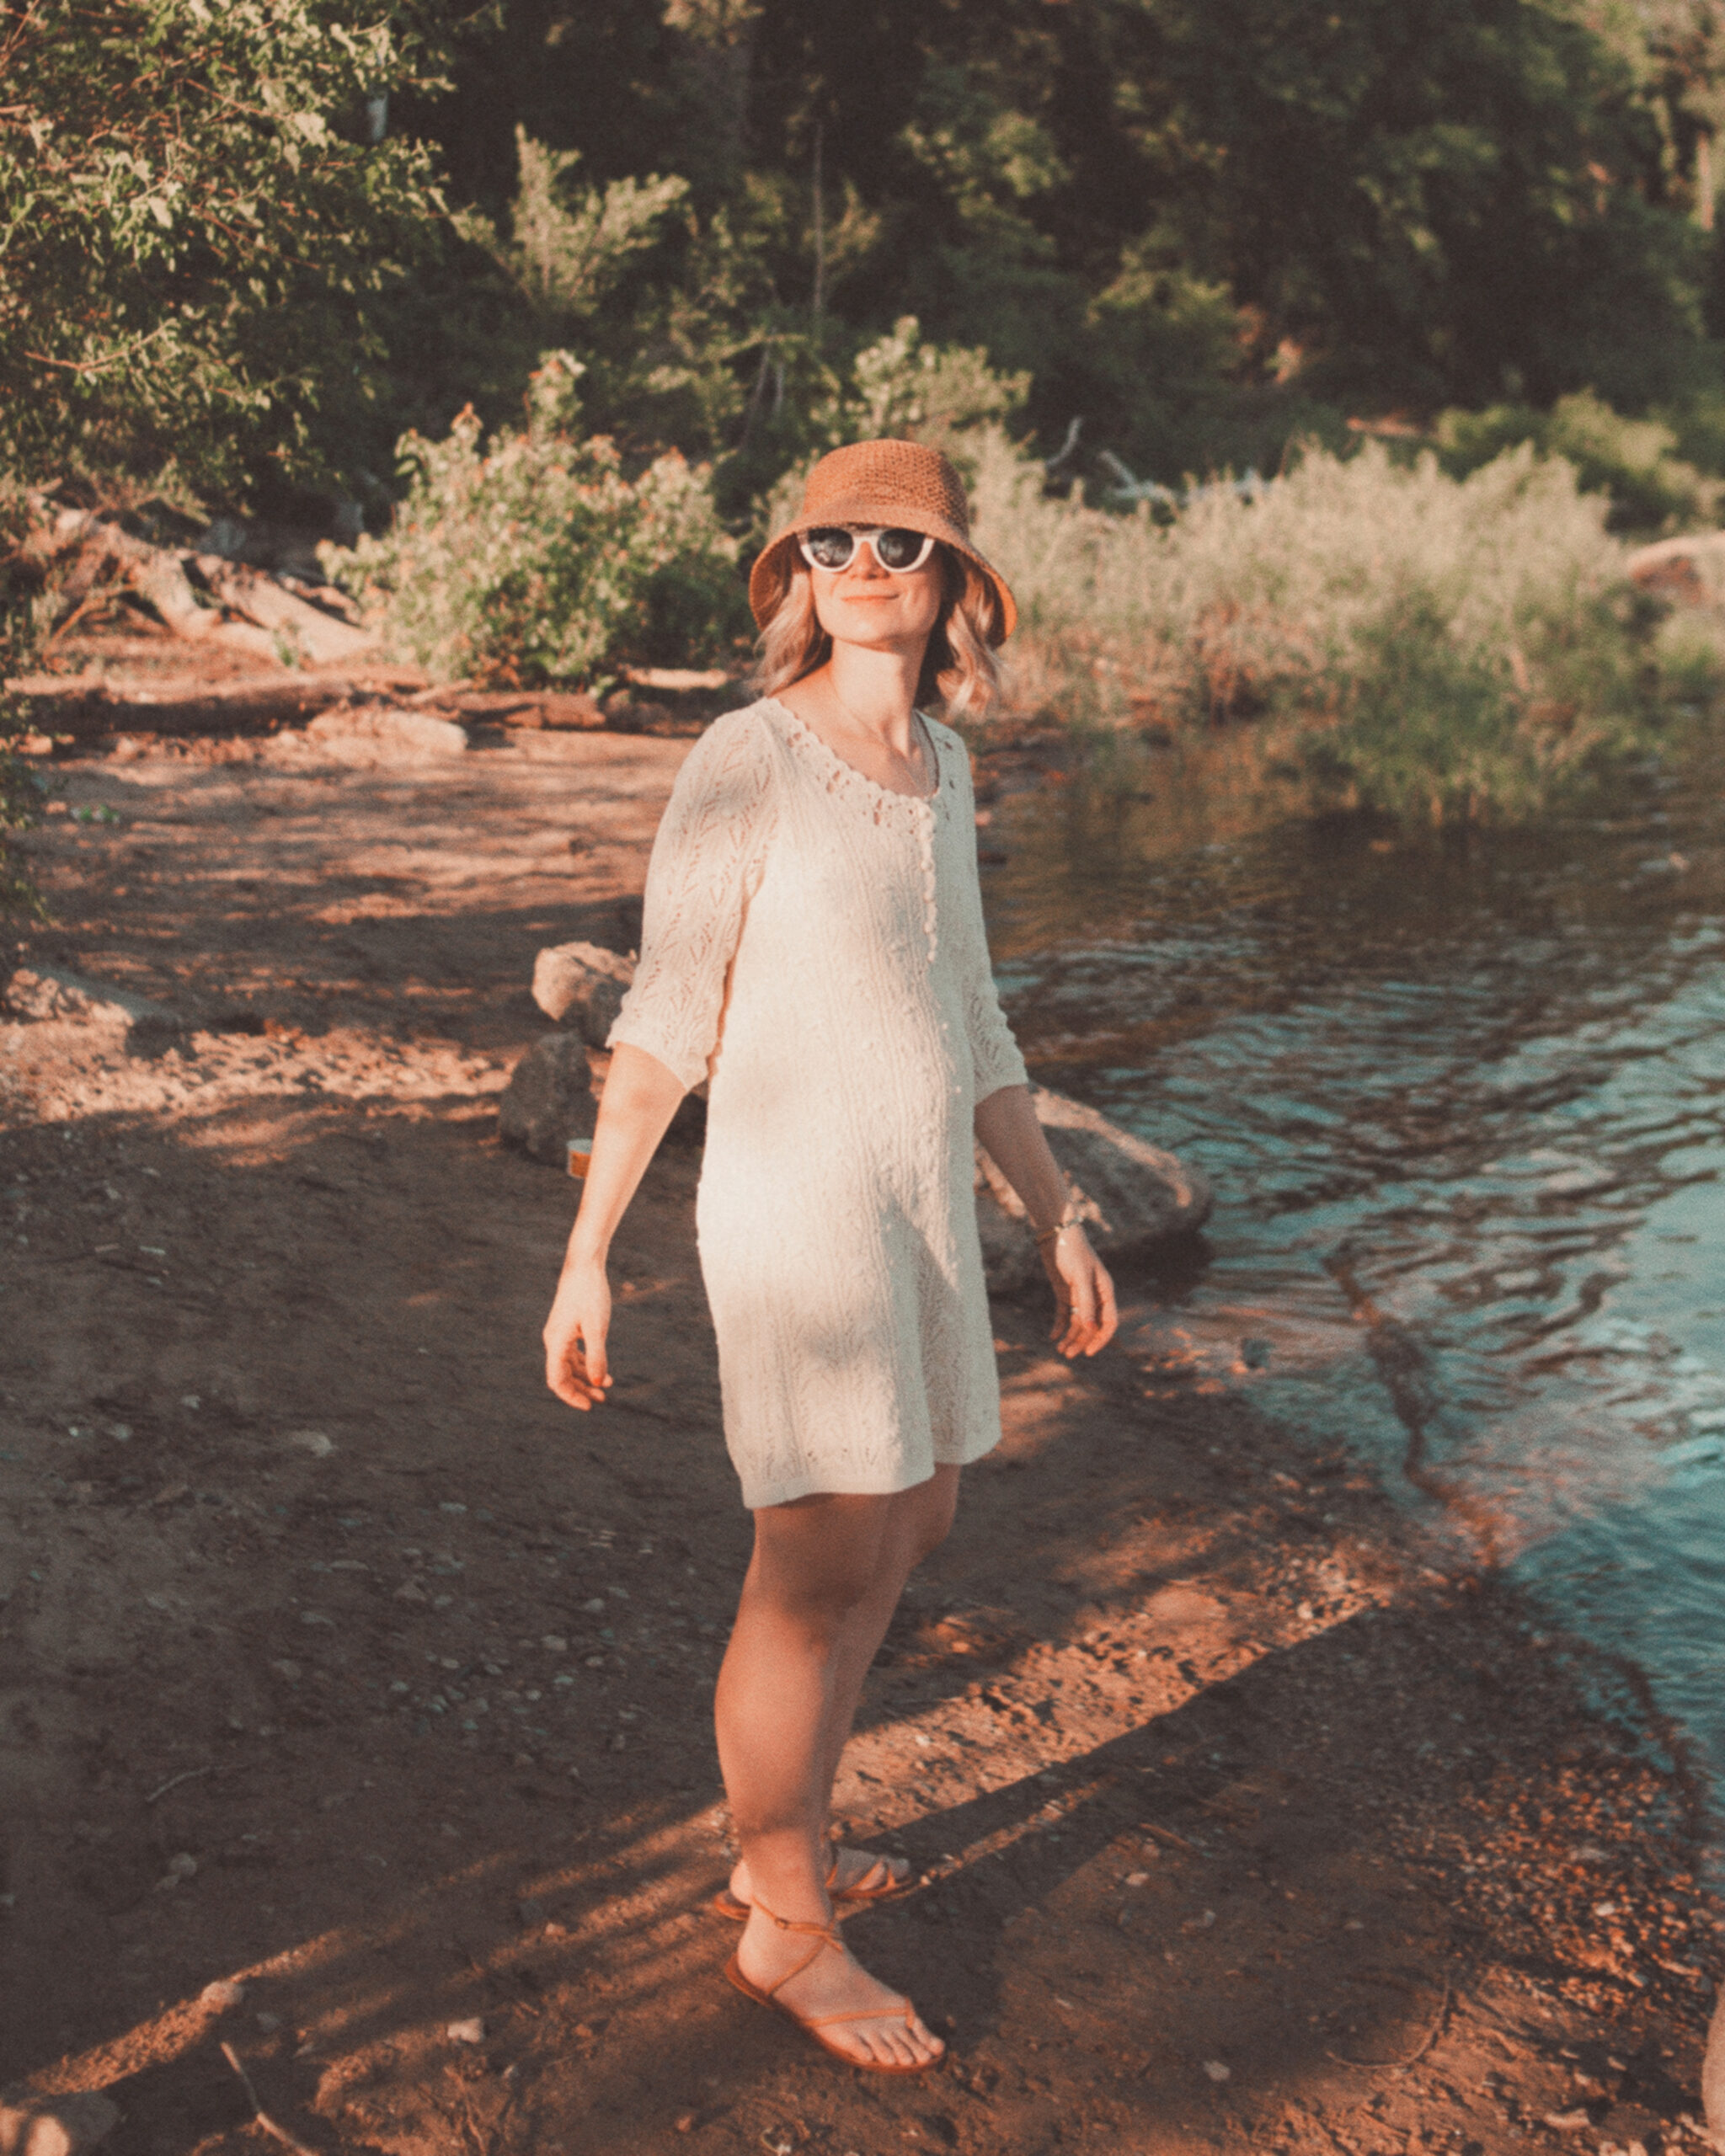 Karin Emily wears a little crochet dress from Sezane and a straw bucket hat from Vitamin A in front of a riverfront